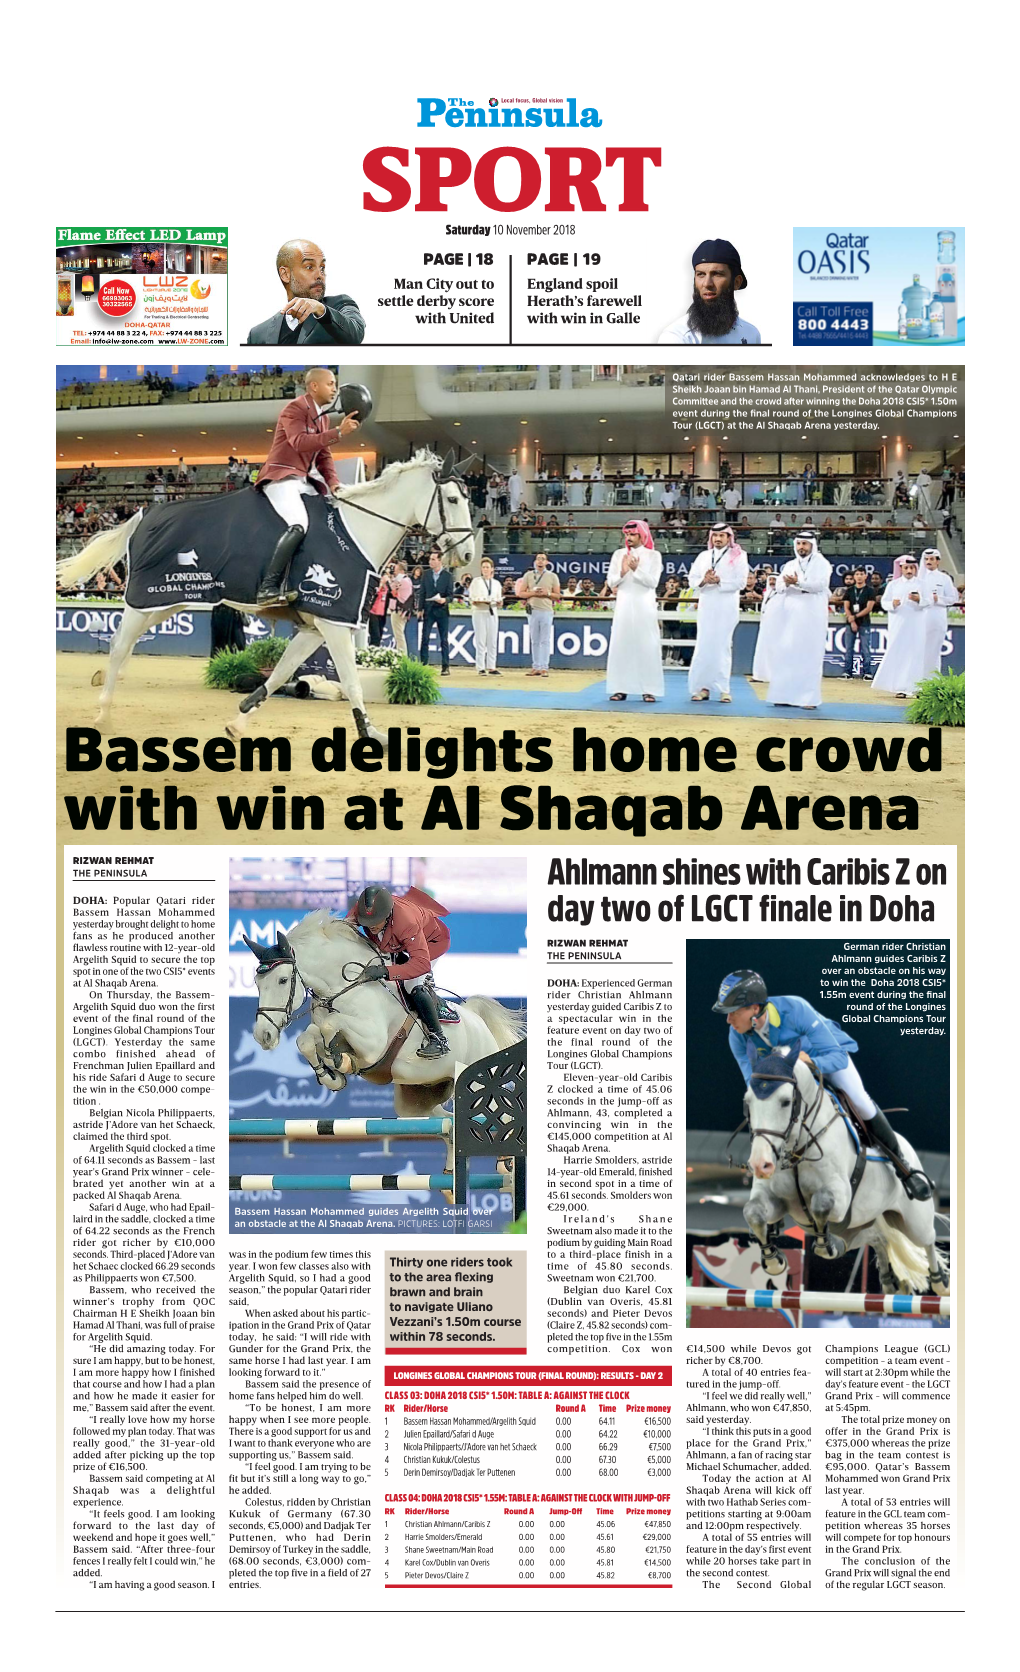 Bassem Delights Home Crowd with Win at Al Shaqab Arena